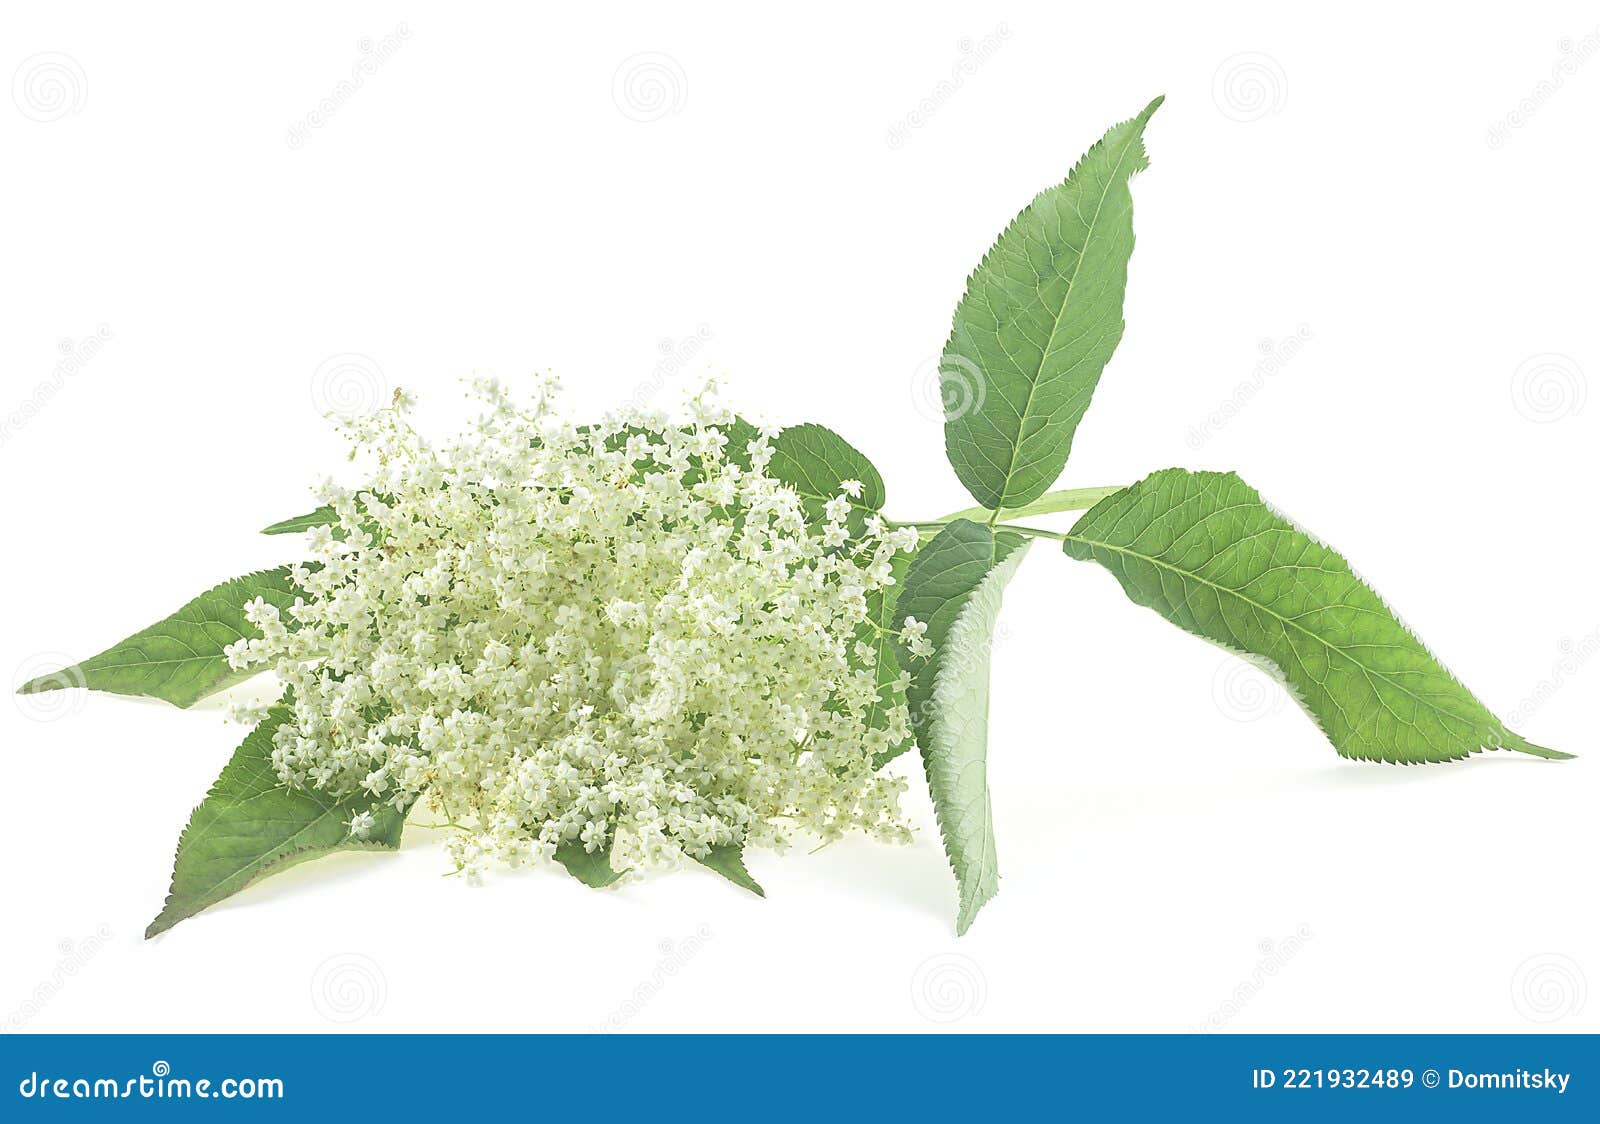 Flowering Branch of Elderberry with Green Leaves Isolated on White ...